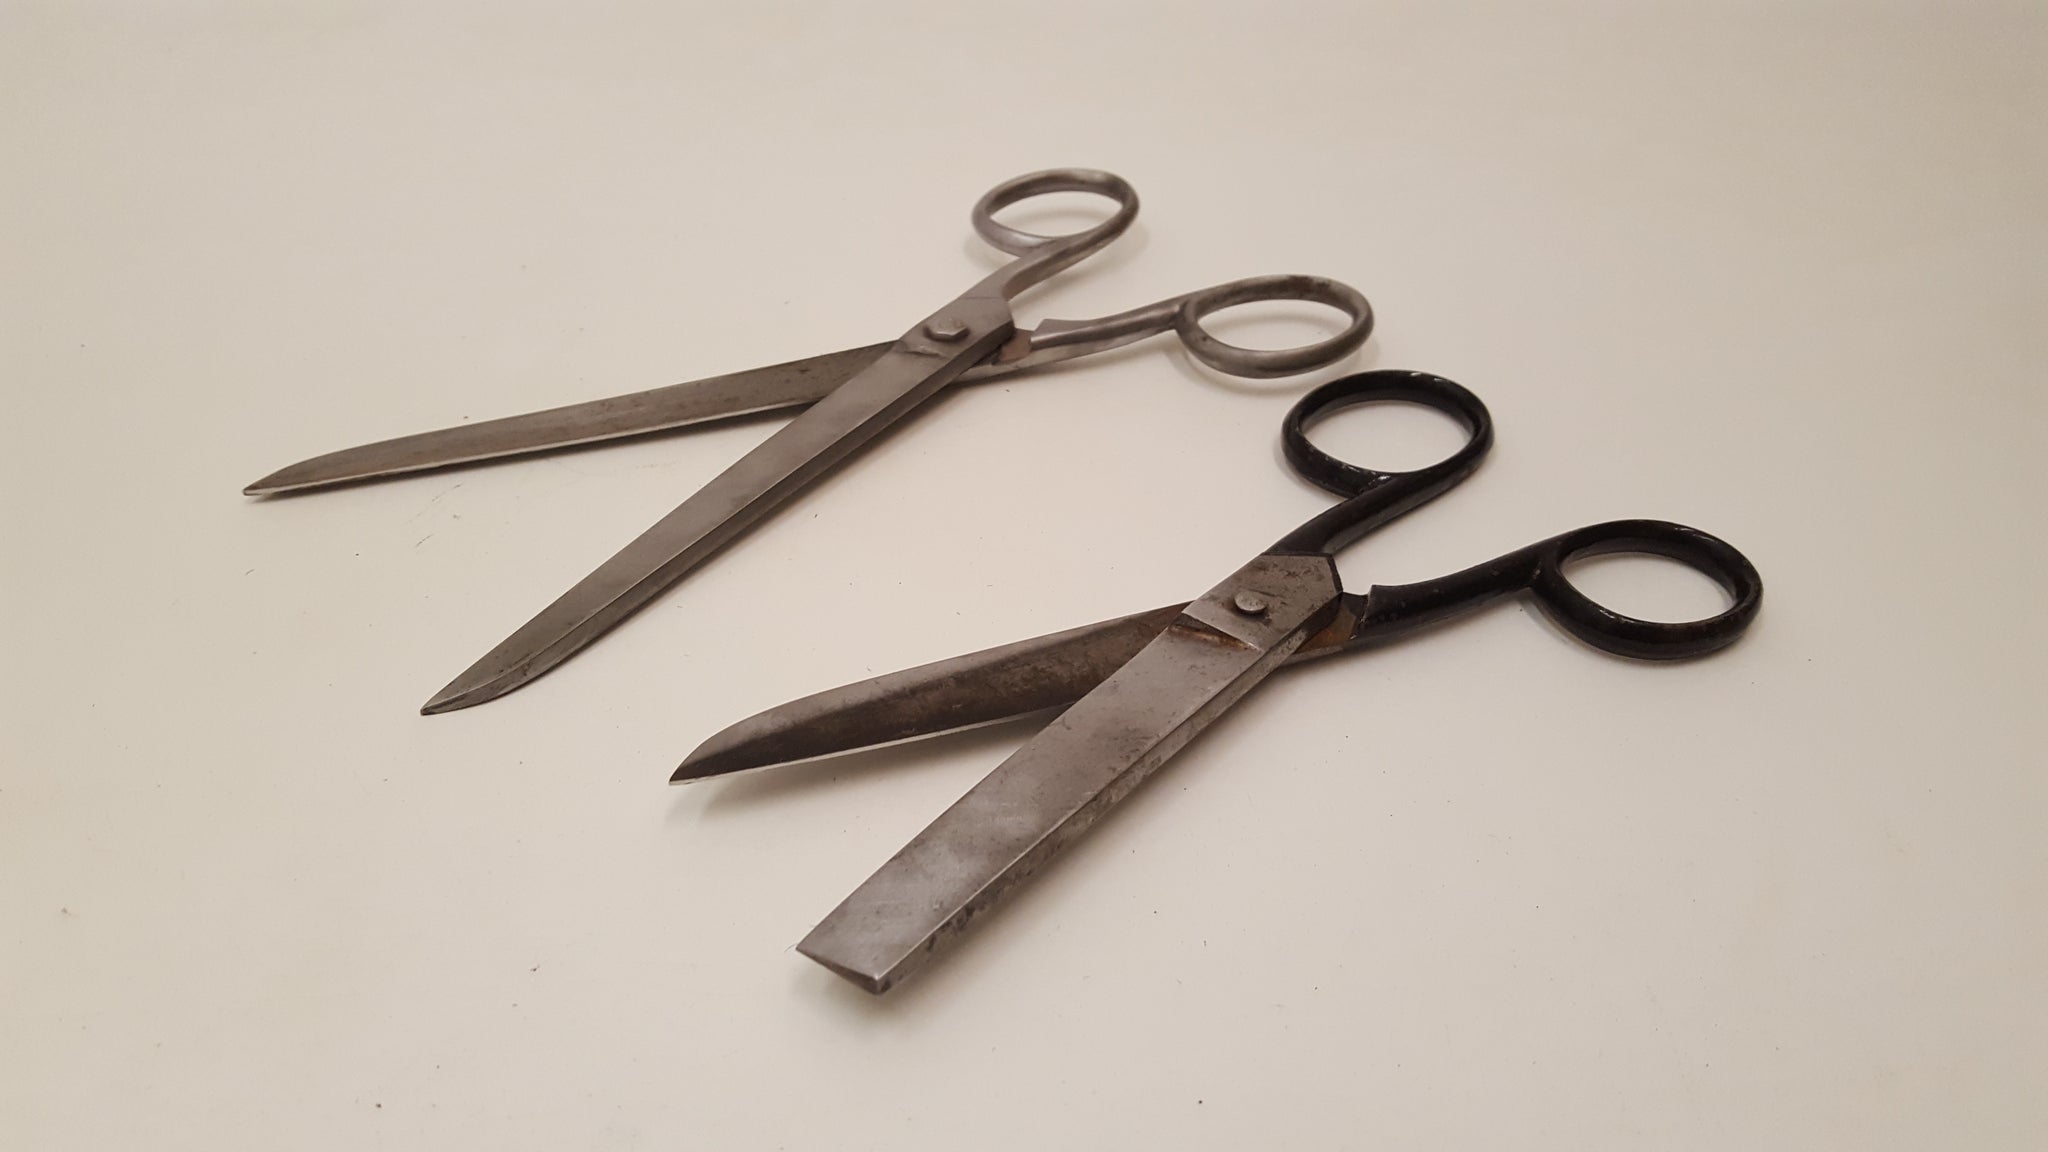 Pair of Large Vintage Scissors in Nice Leather Case 36039